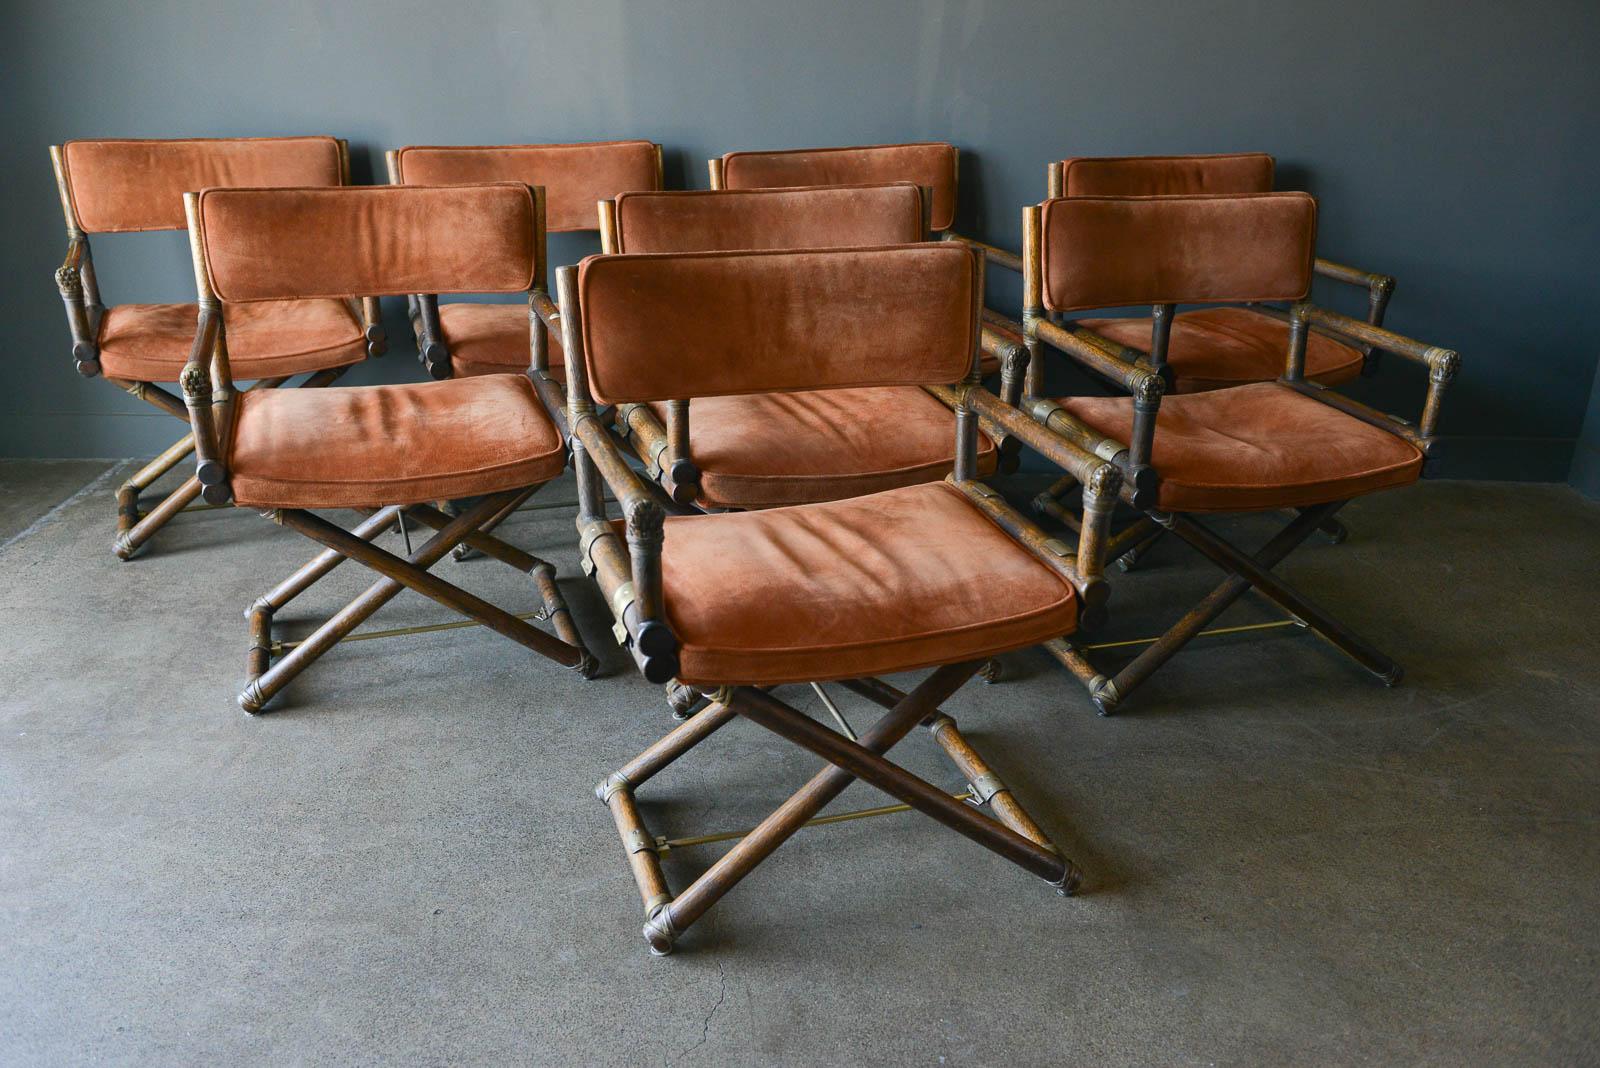 Set of 8 suede and oak directors chairs by Lyda Levi for McGuire, circa 1960. Highly desirable X-base directors chairs with beautiful brass hinges and detailing with original rust colored suede cushions in very good condition. Armrests are oak